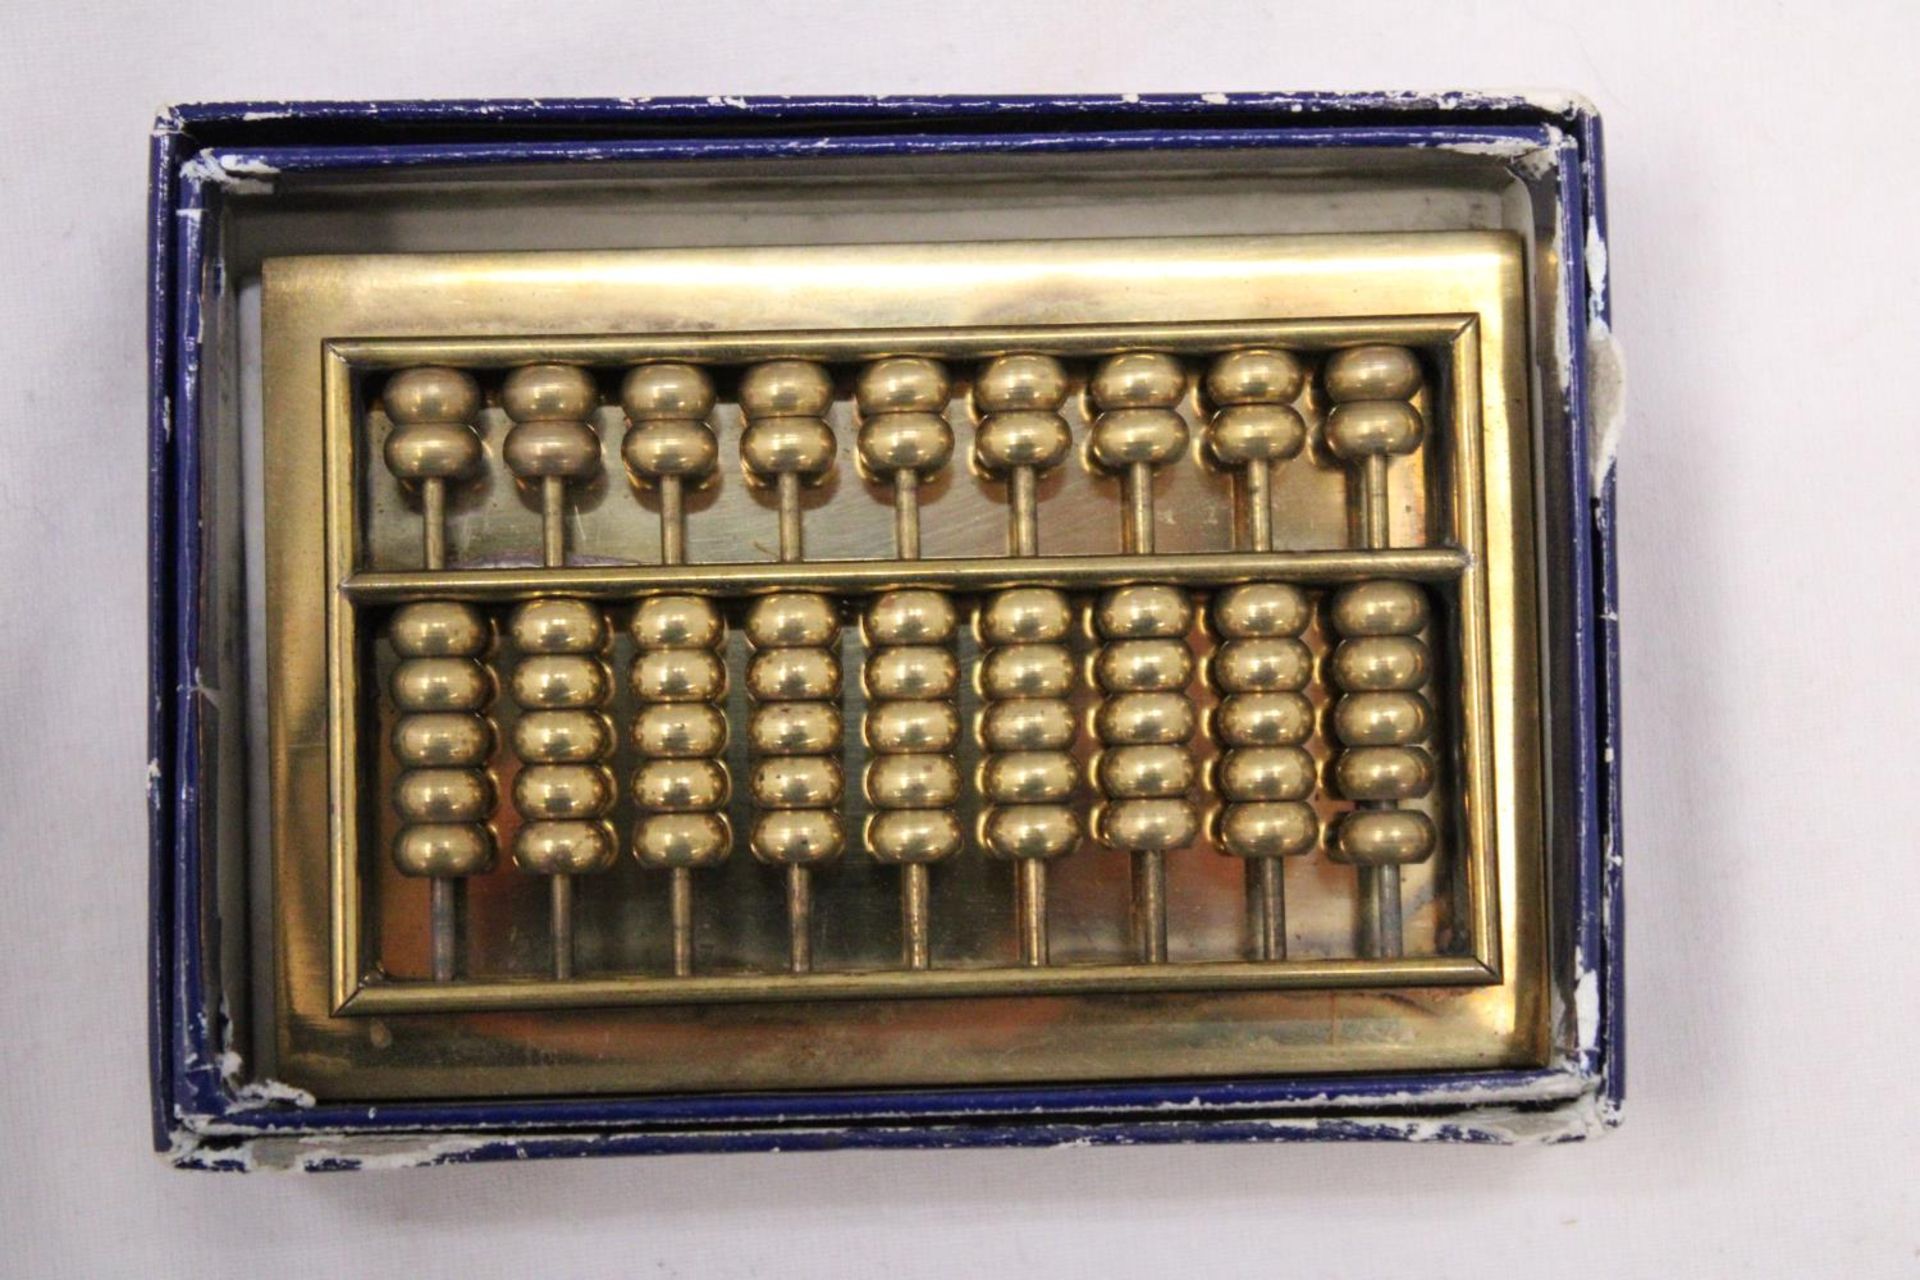 A SMALL VINTAGE HEAVY BRASS ABACUS - Image 2 of 4